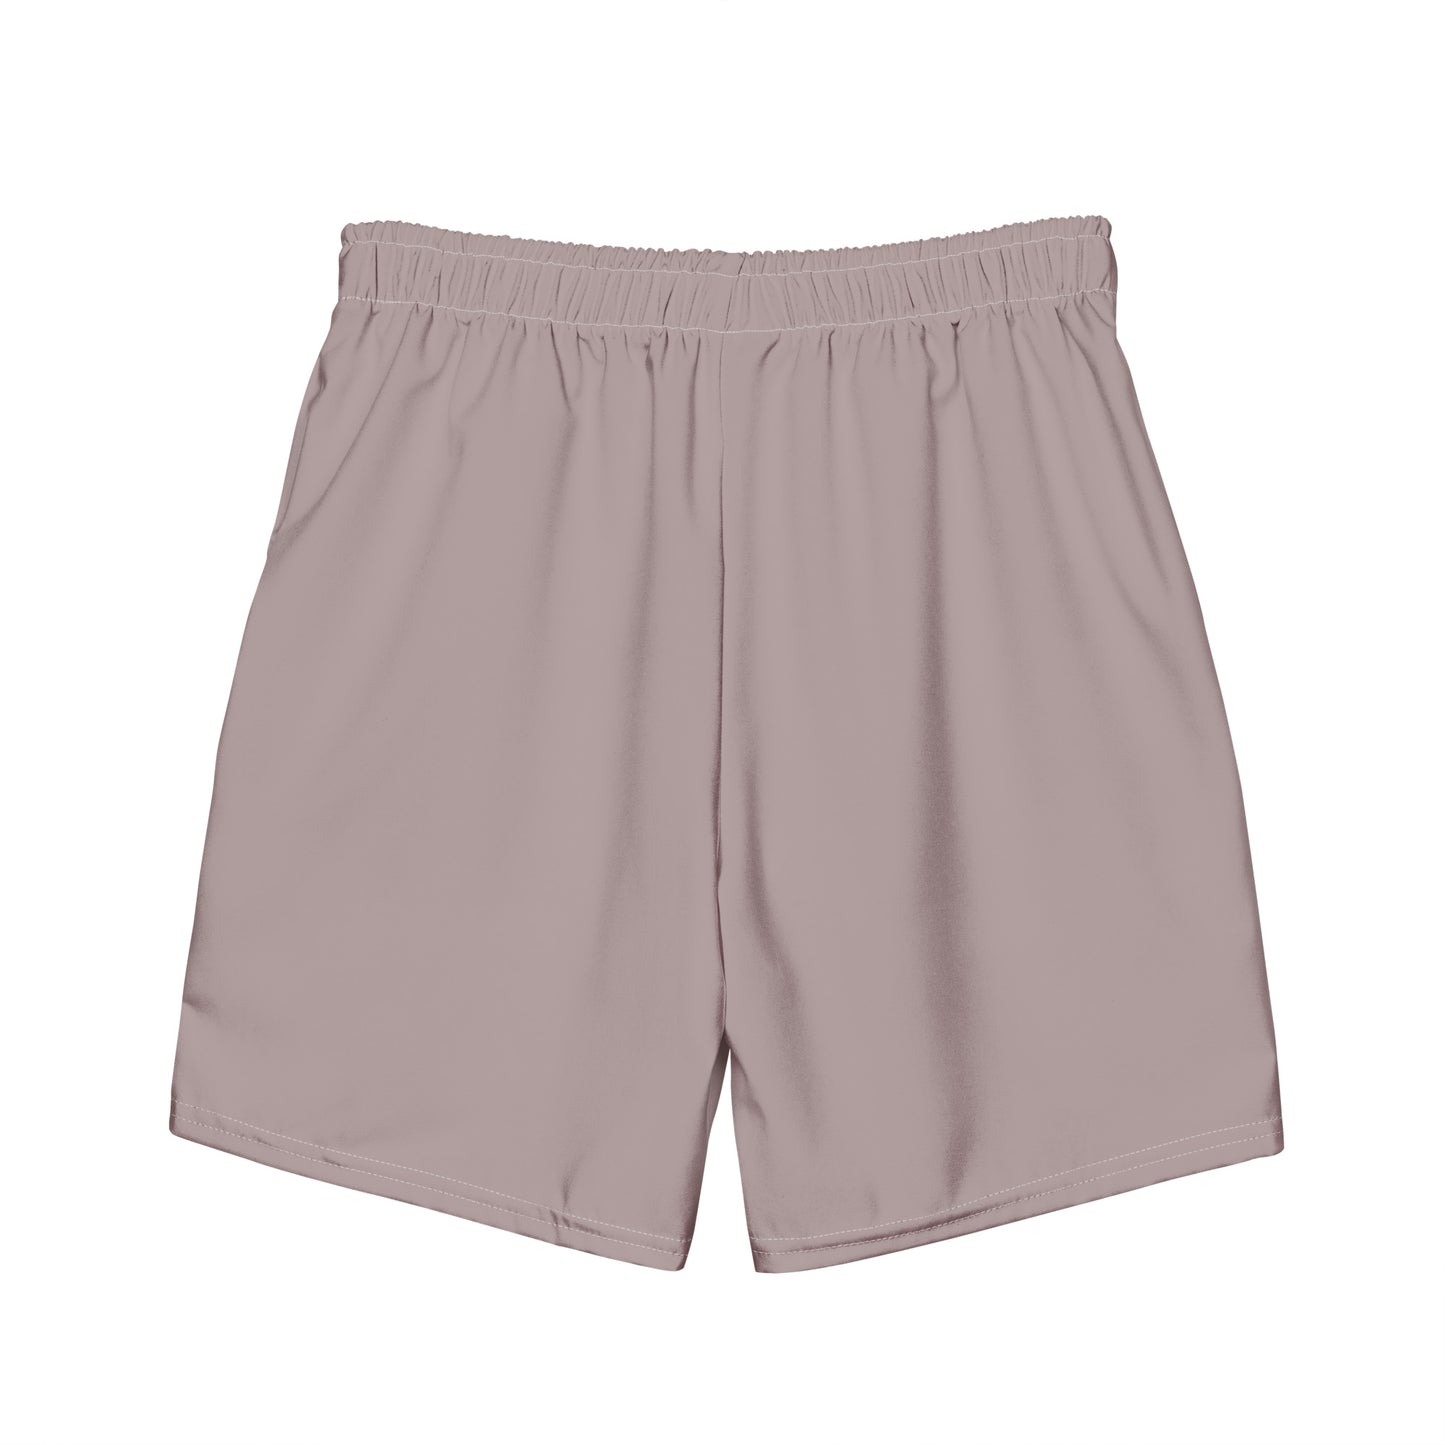 Space Grey - Sustainably Made Men's swim trunks